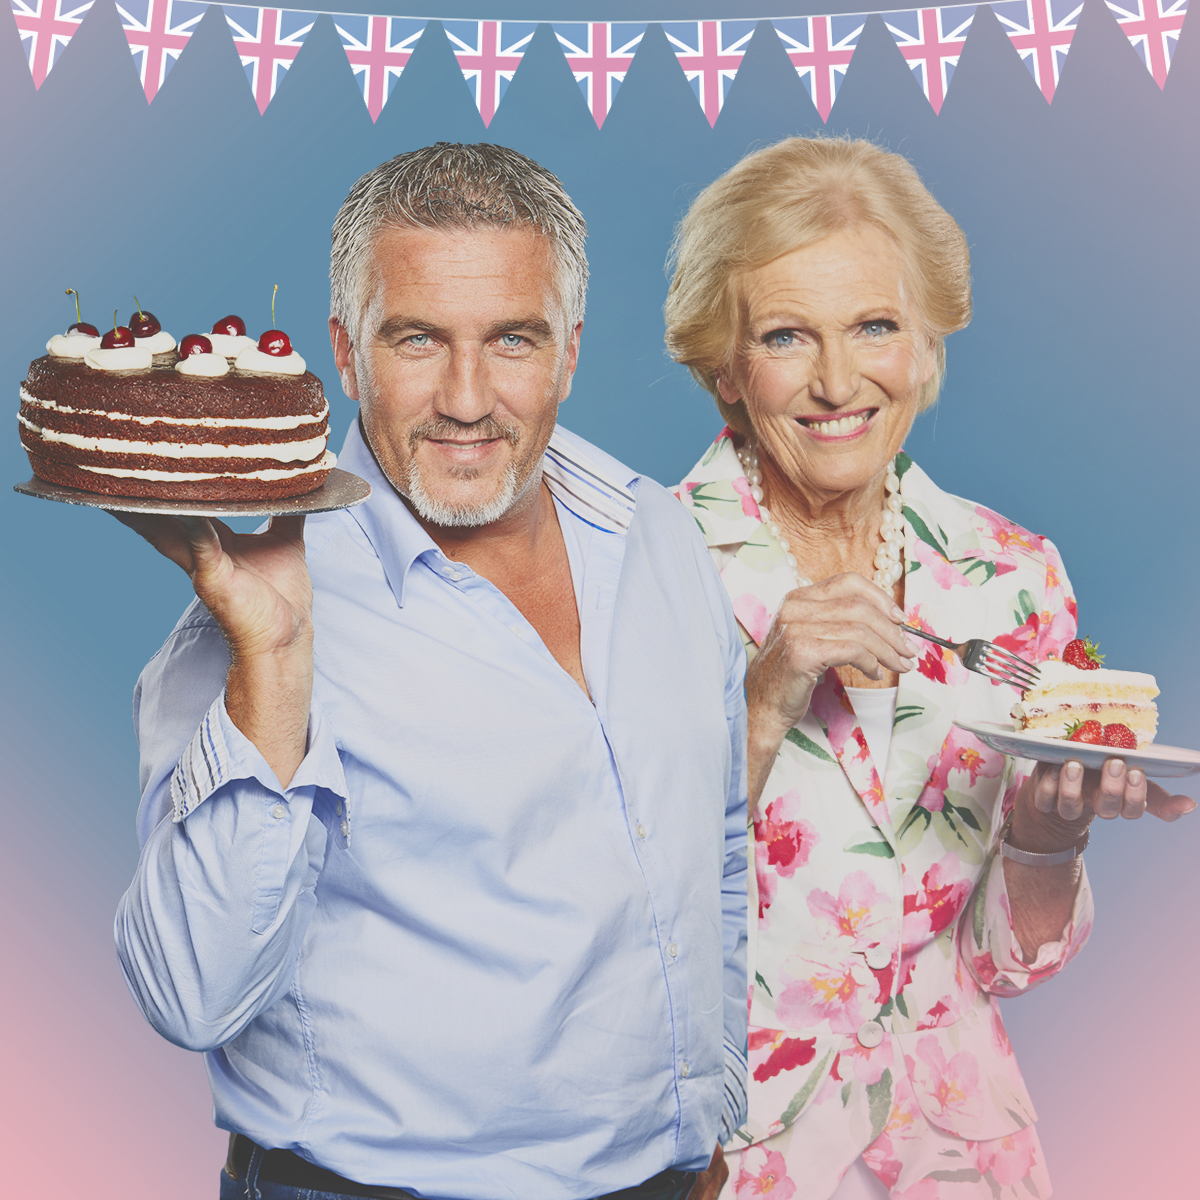 https://akns-images.eonline.com/eol_images/Entire_Site/2021027/rs_1200x1200-210127175436-1200-great-british-bake-off-paul-hollywood.jpg?fit=around%7C1200:1200&output-quality=90&crop=1200:1200;center,top